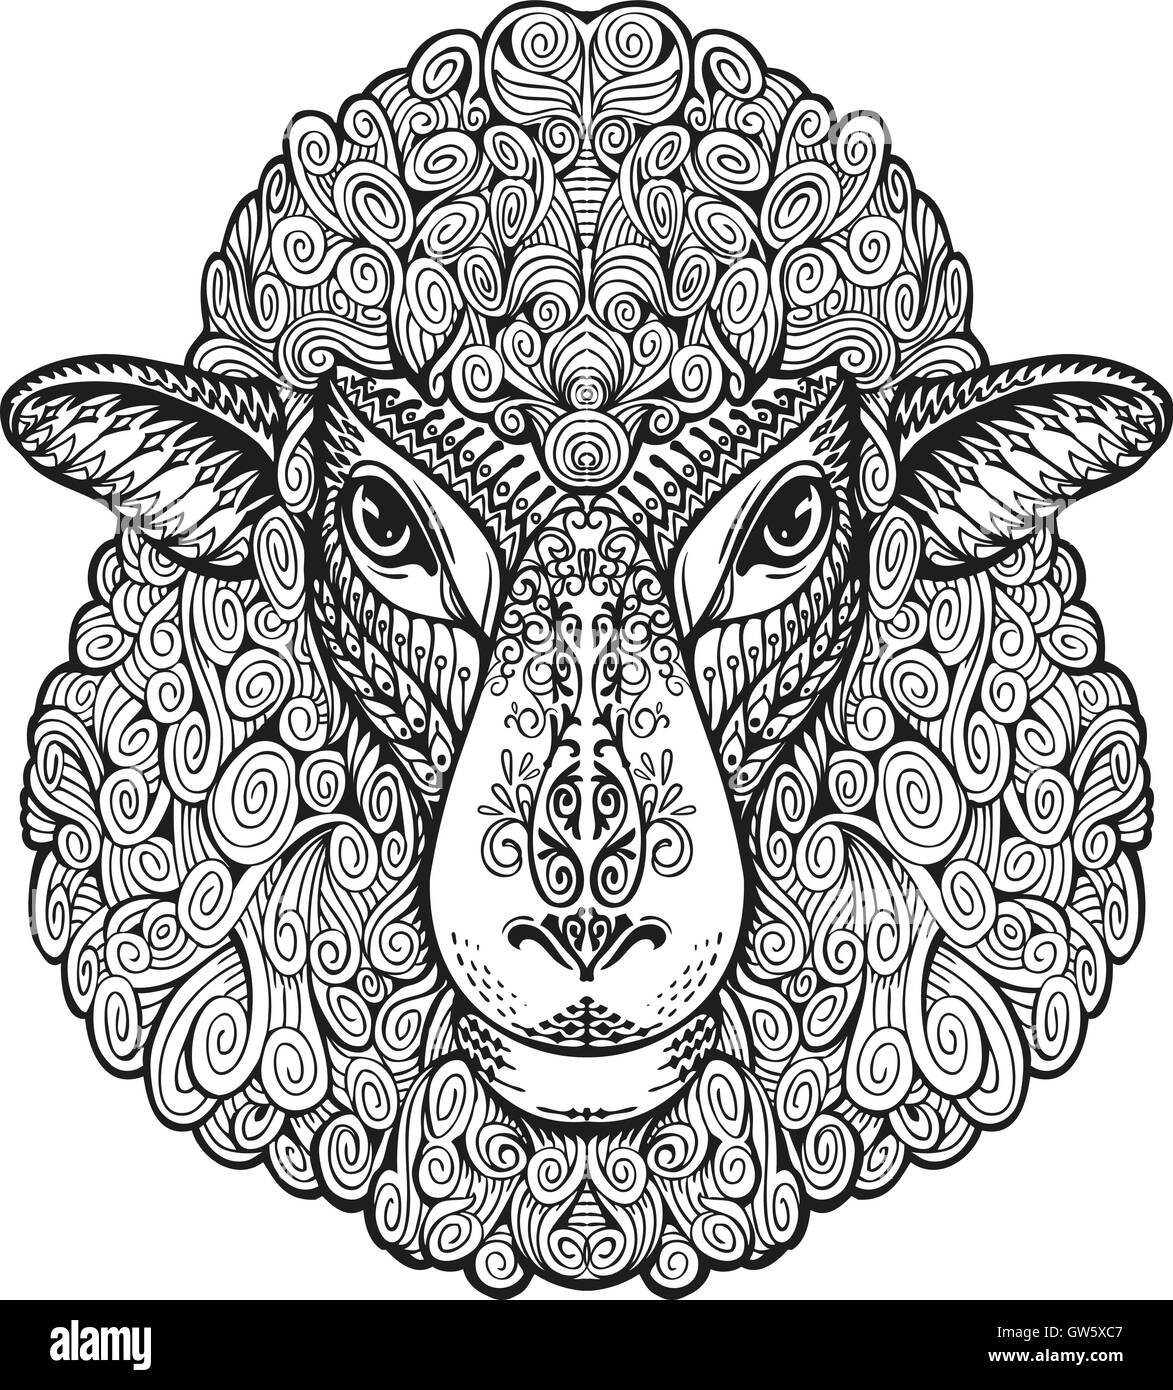 Head sheep. Ethnic patterns. Hand drawn vector illustration with floral elements. Lamb, animal symbol Stock Vector